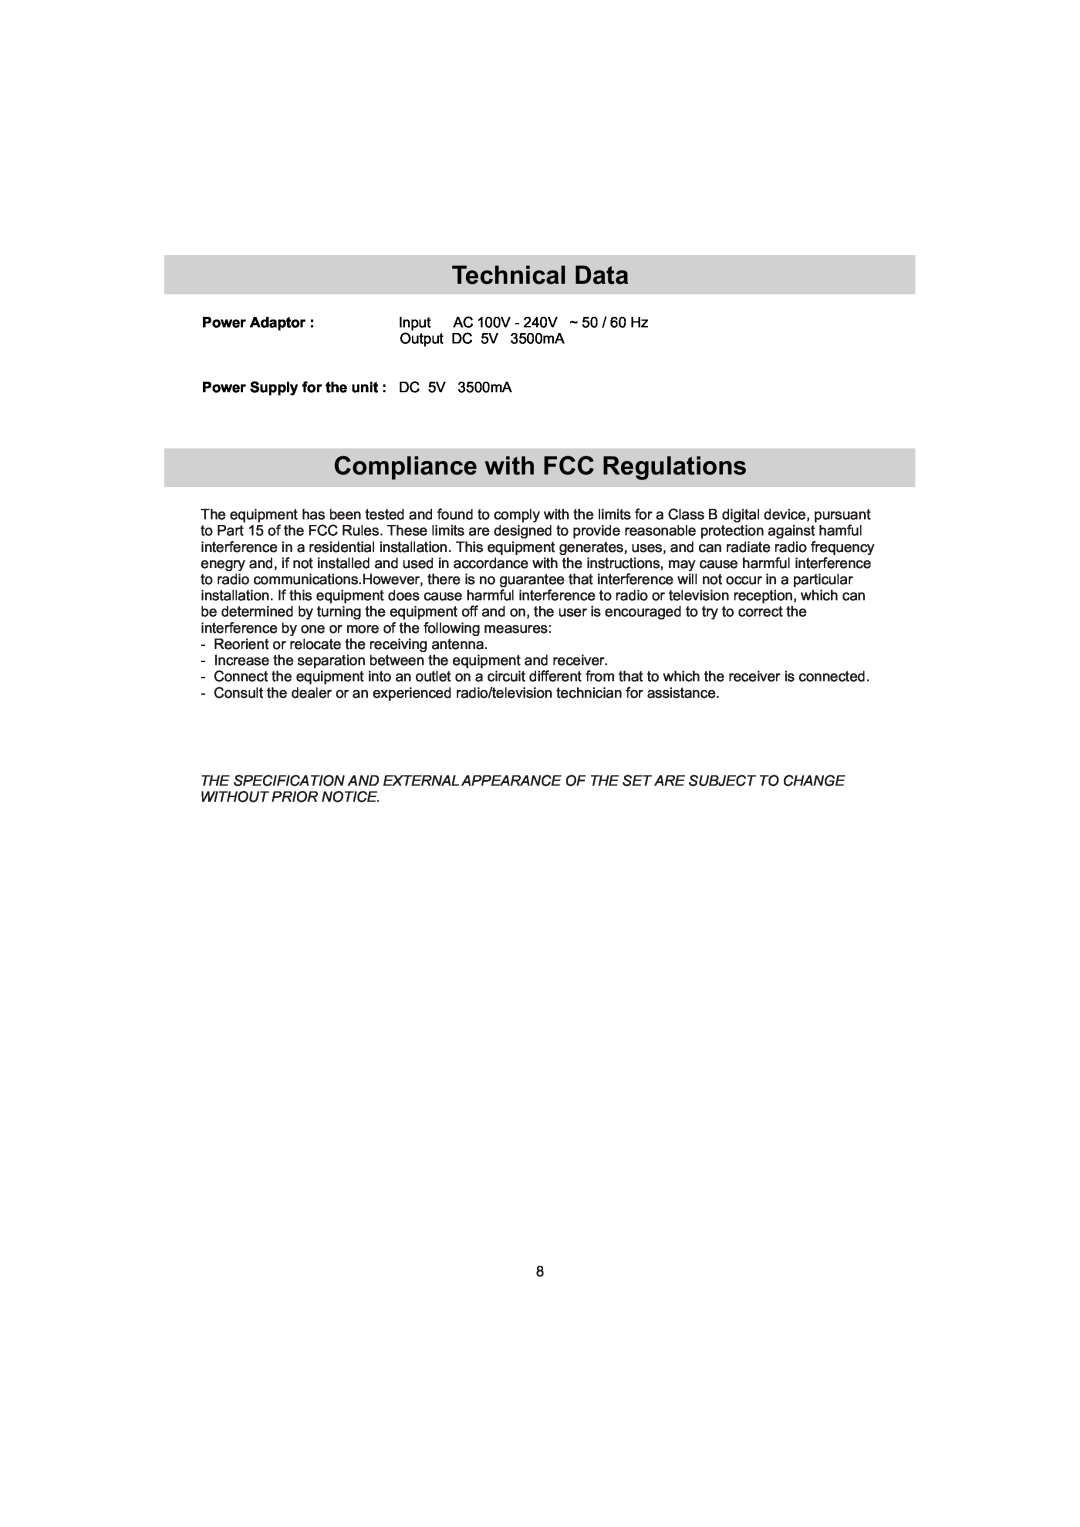 Haier IPD-01 manual Technical Data, Compliance with FCC Regulations, Power Adaptor 